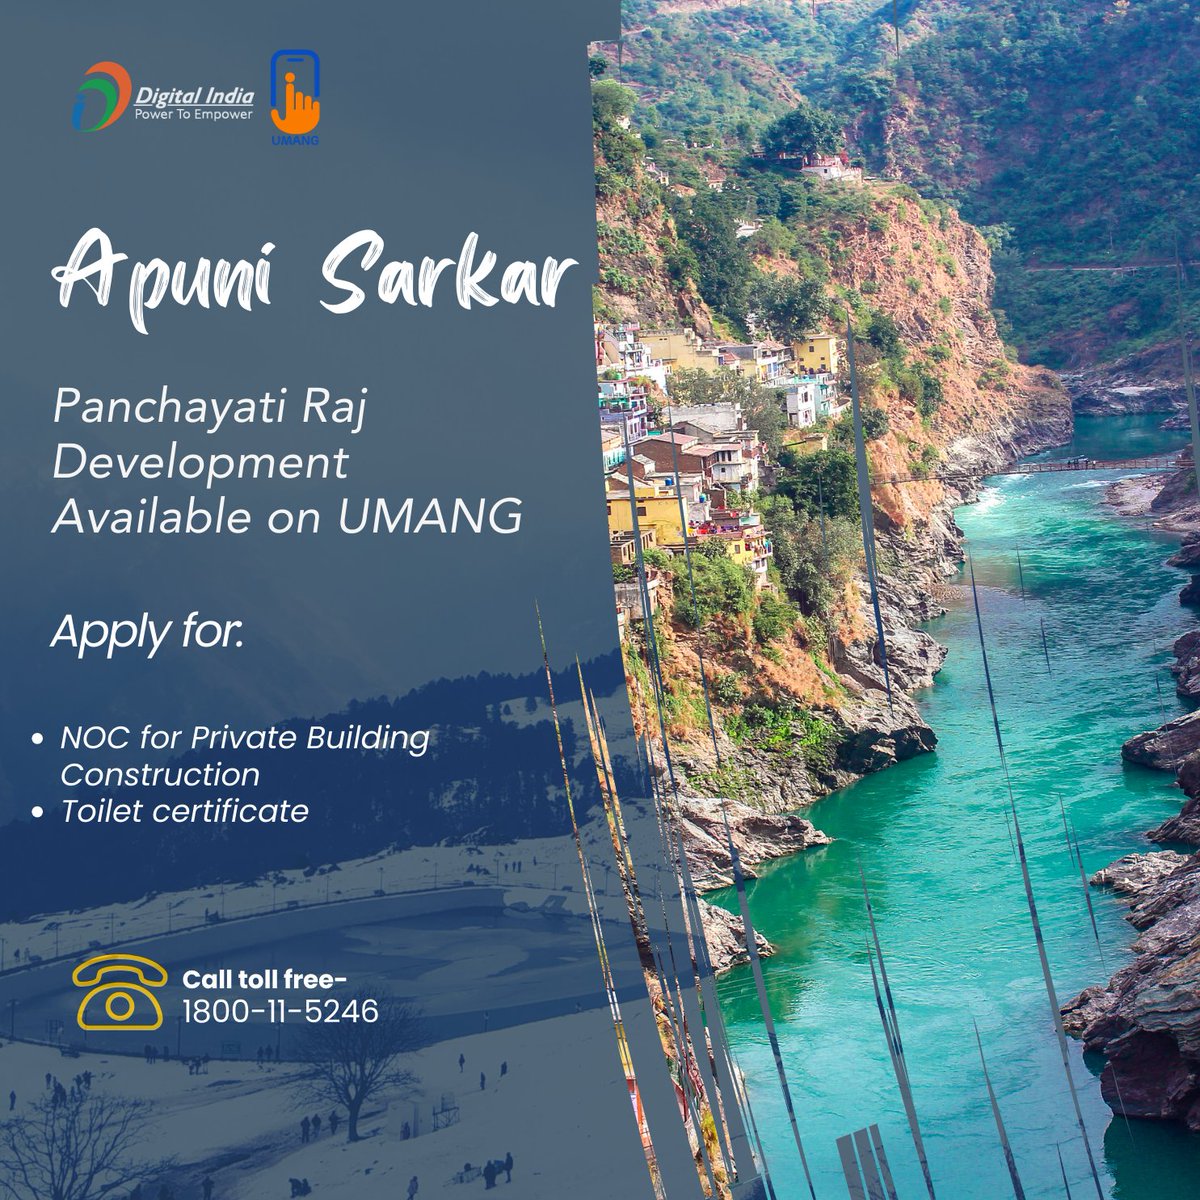 Panchayati Raj Development Services from the Uttarakhand Government are now accessible on UMANG! Apply now for an NOC for private building construction and a toilet certificate. #DigitalIndia #uttrakhand #uttrakhandtourism